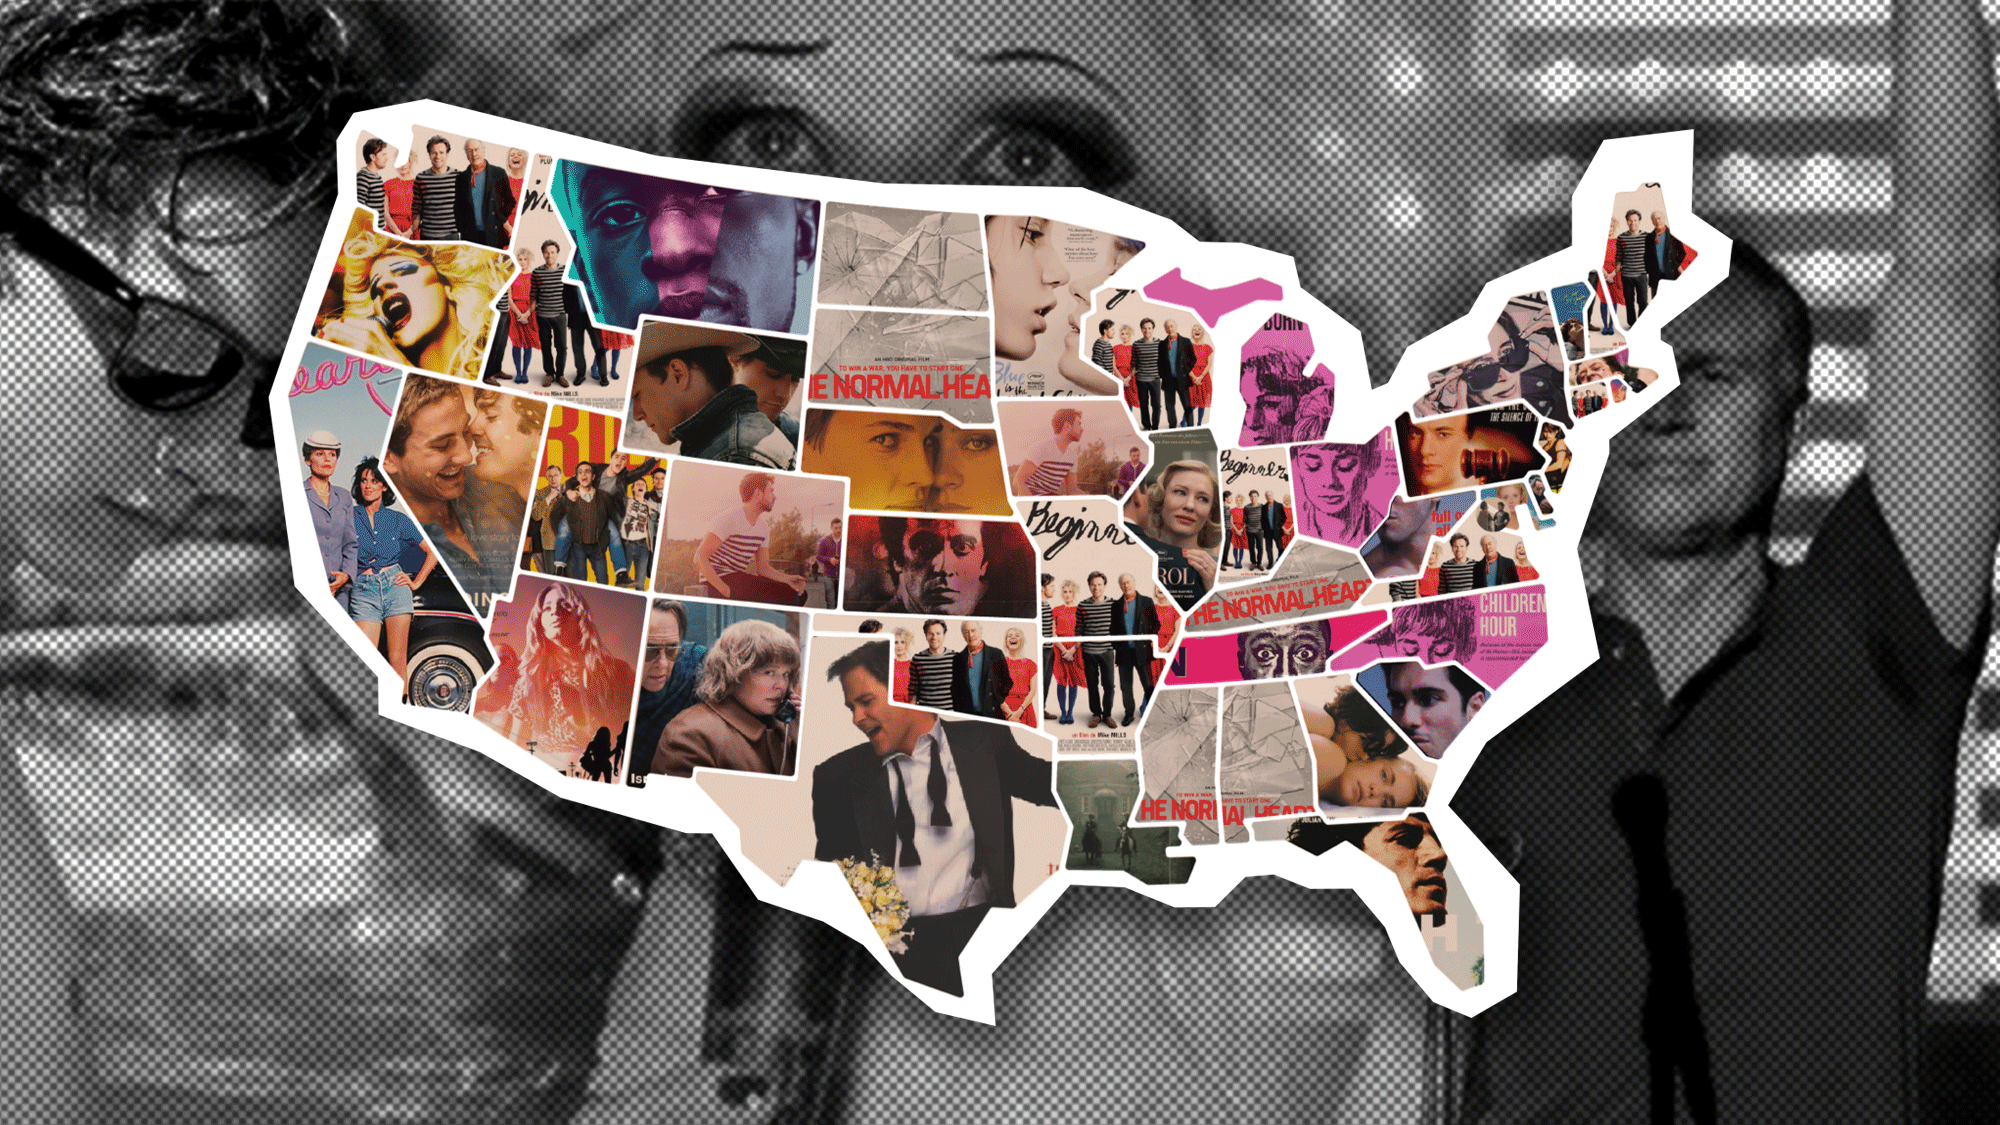 MOST POPULAR QUEER MOVIES BY STATE